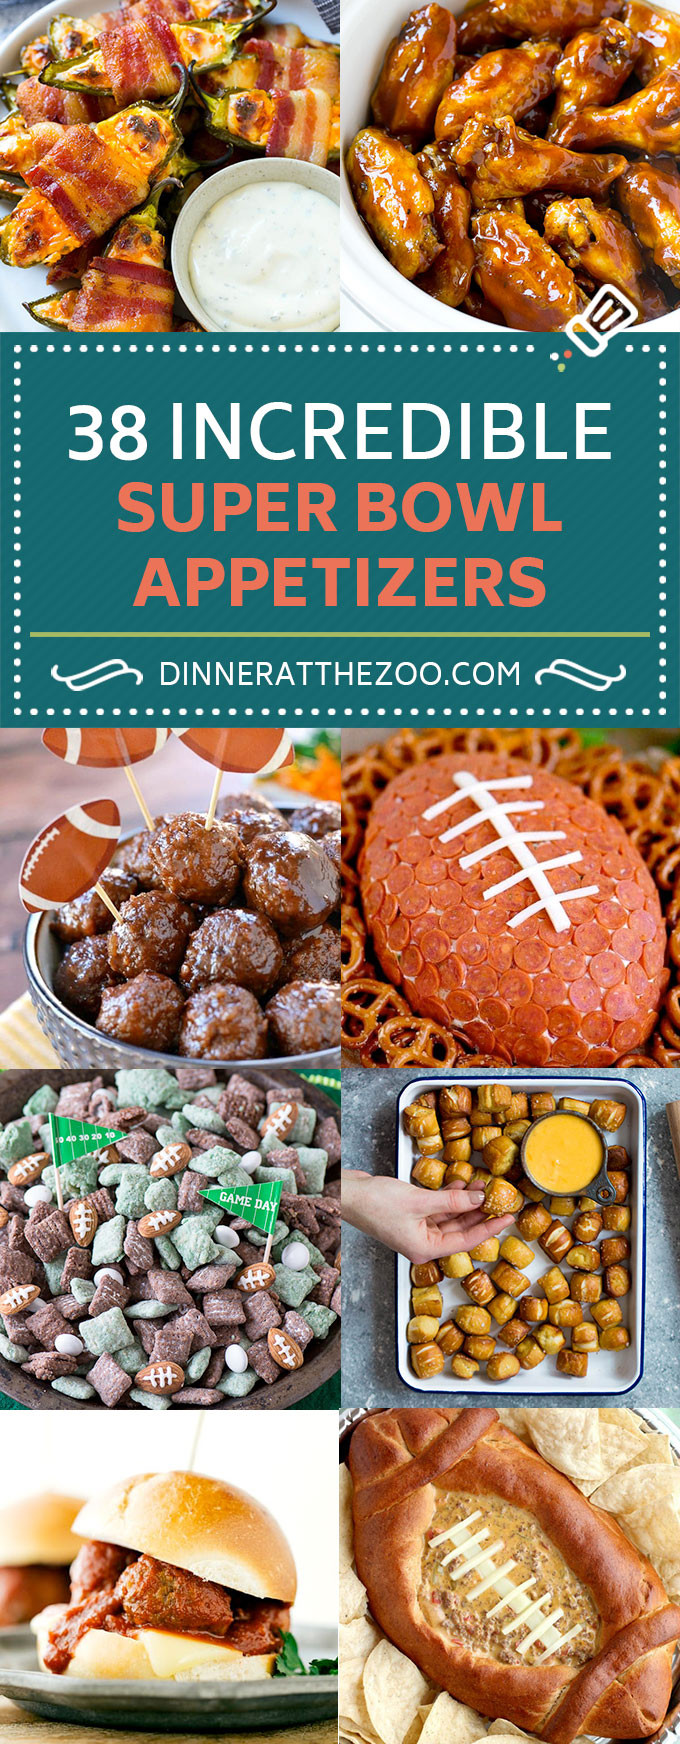 Best Super Bowl Recipes
 45 Incredible Super Bowl Appetizer Recipes Dinner at the Zoo